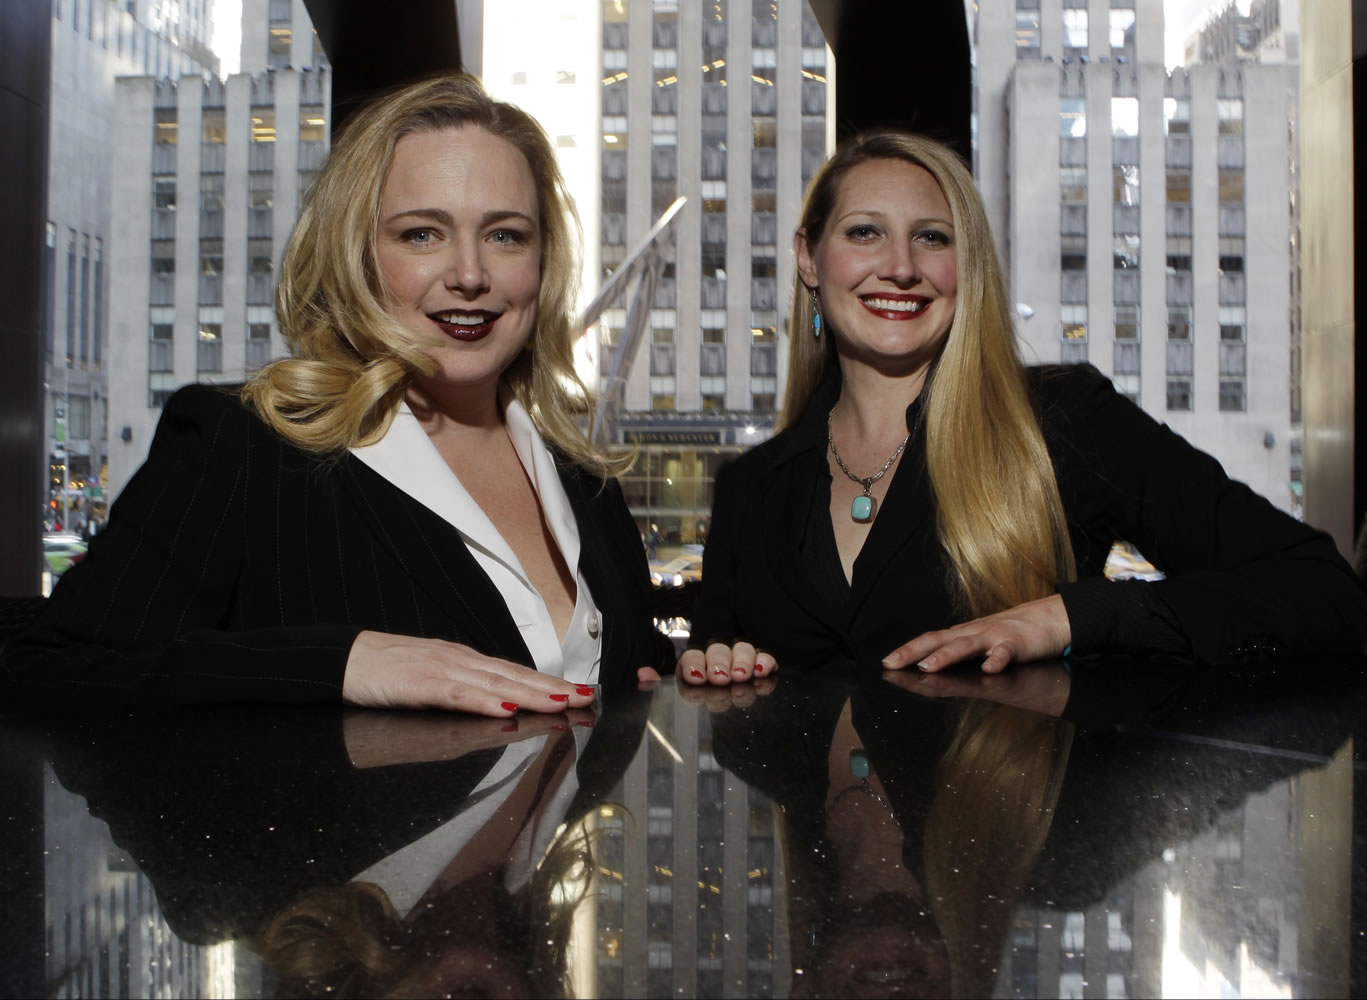 Crystl Faye Horton-Friedman, right, and Kristin Beckler are both mothers and work as sommeliers at Del Frisco's in New York.